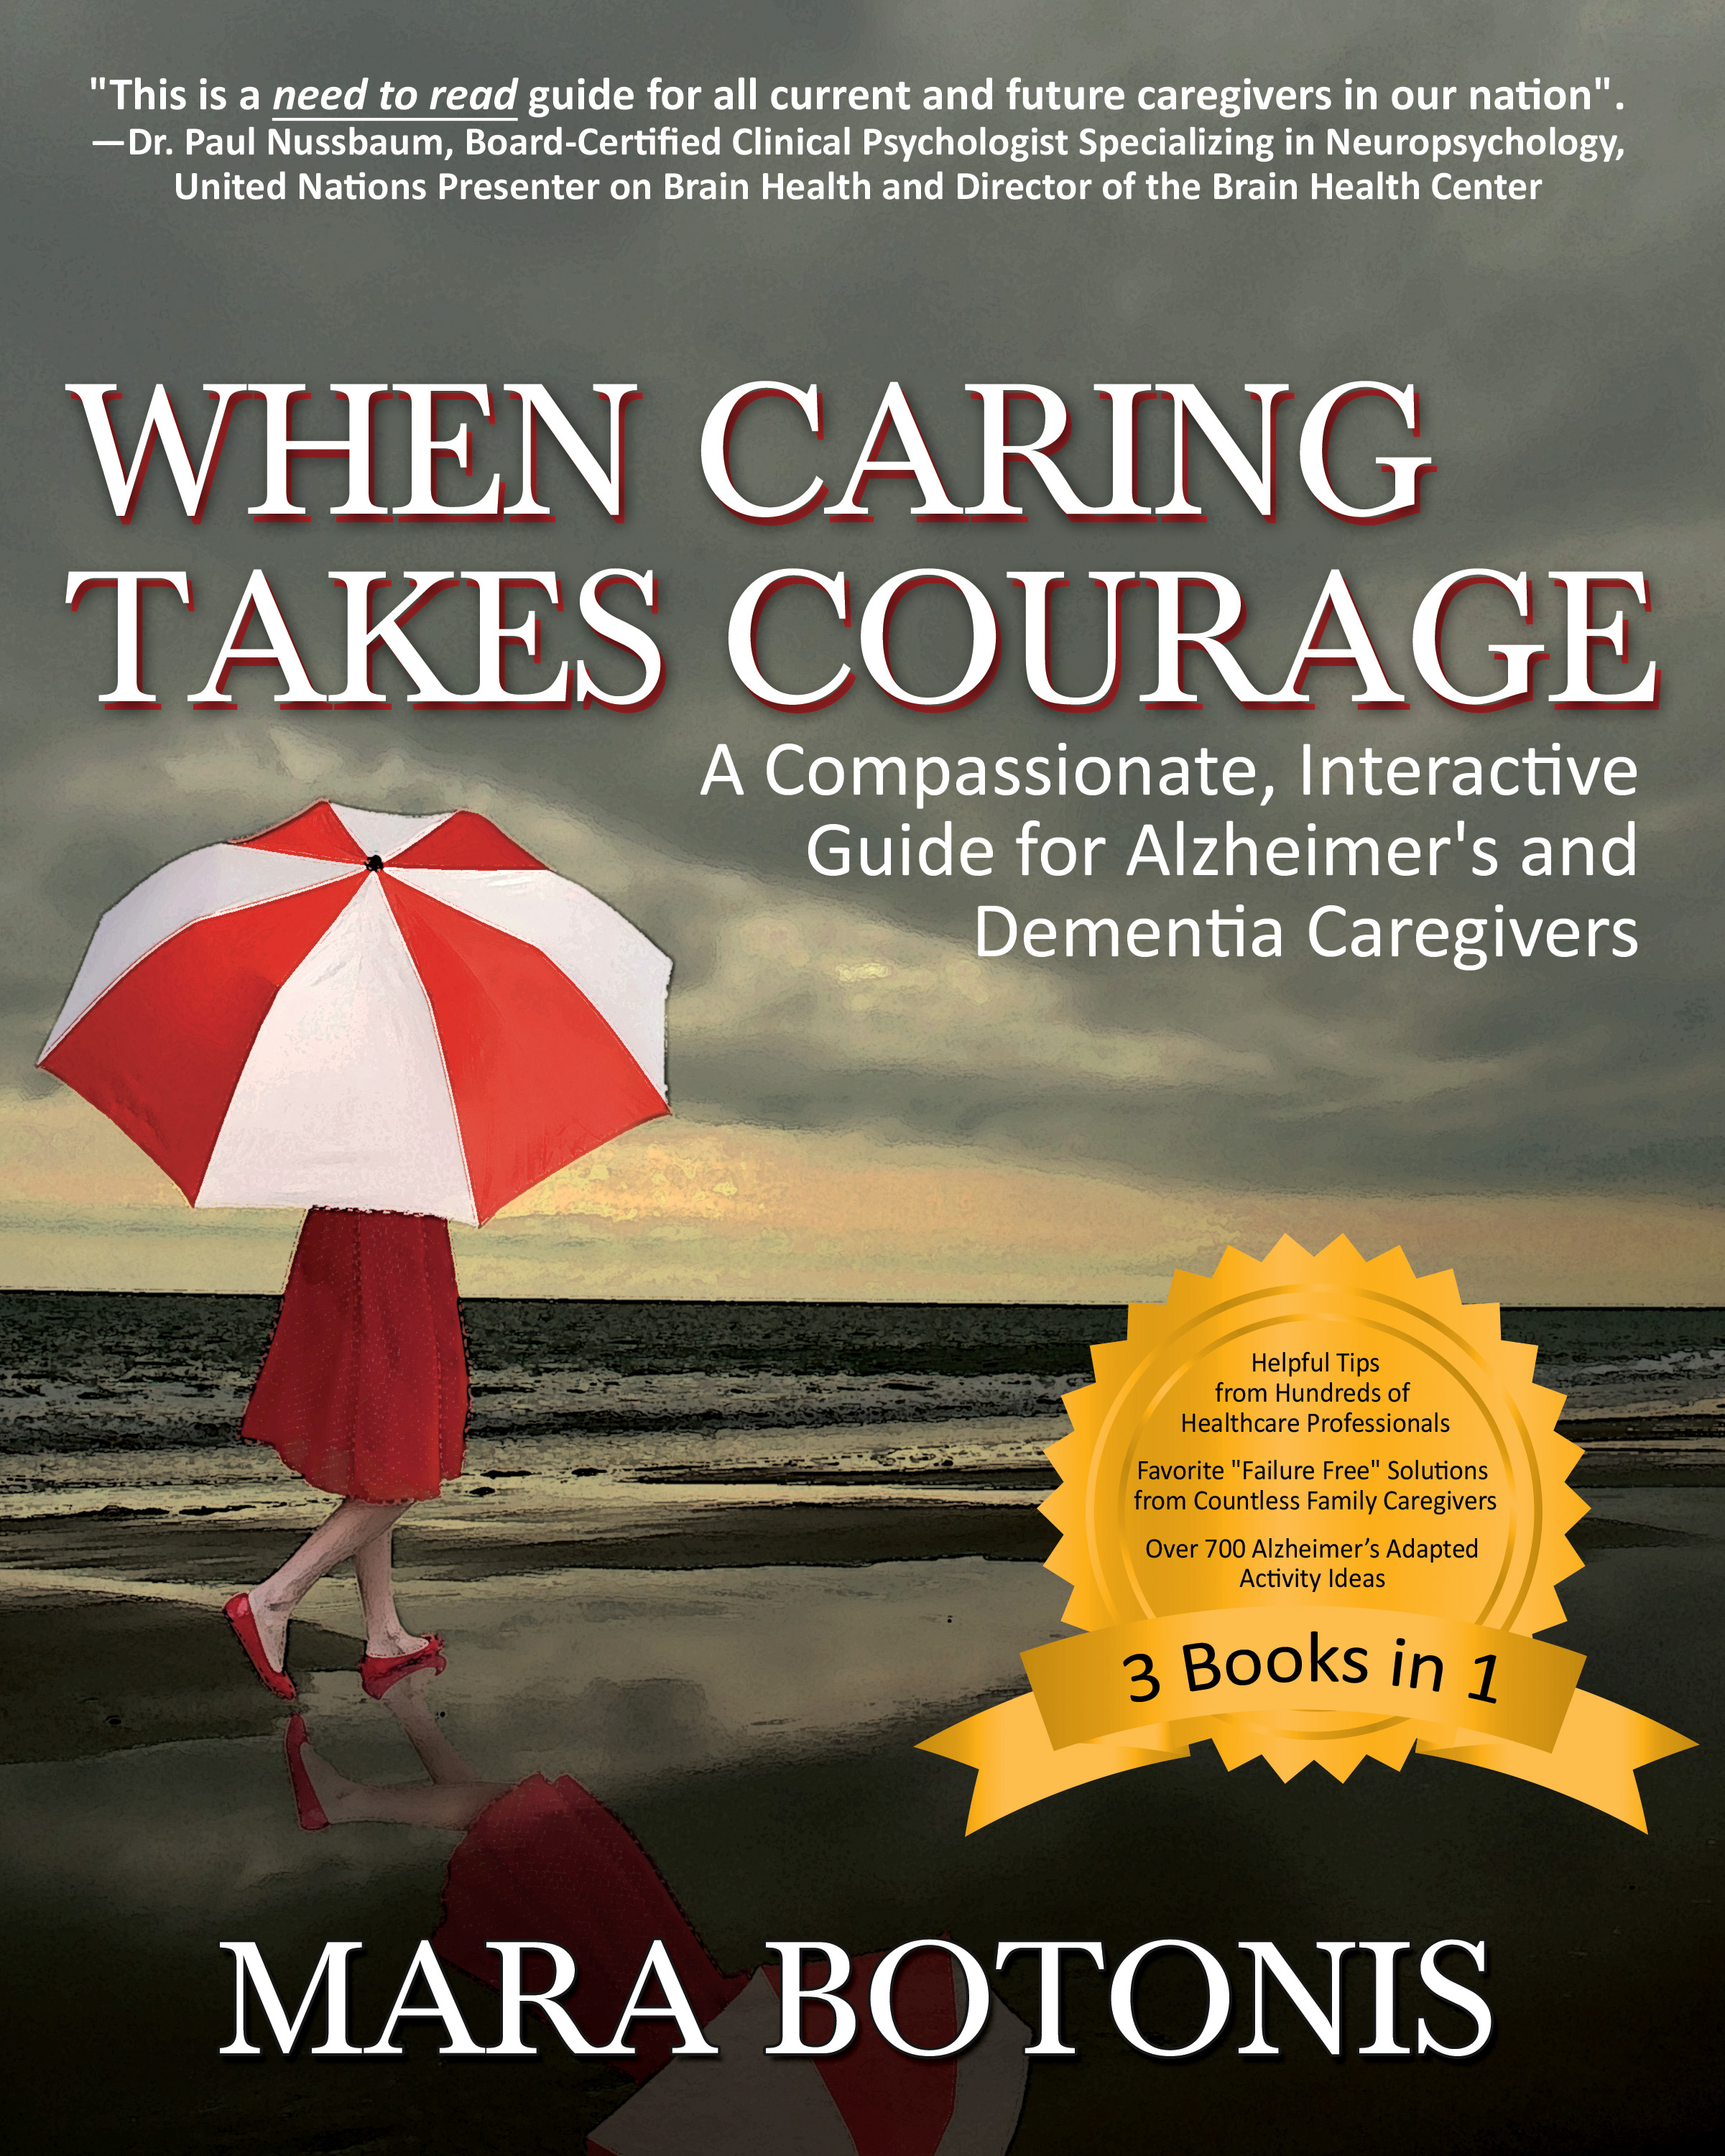 When Caring Takes Courage by Mara Botonis.